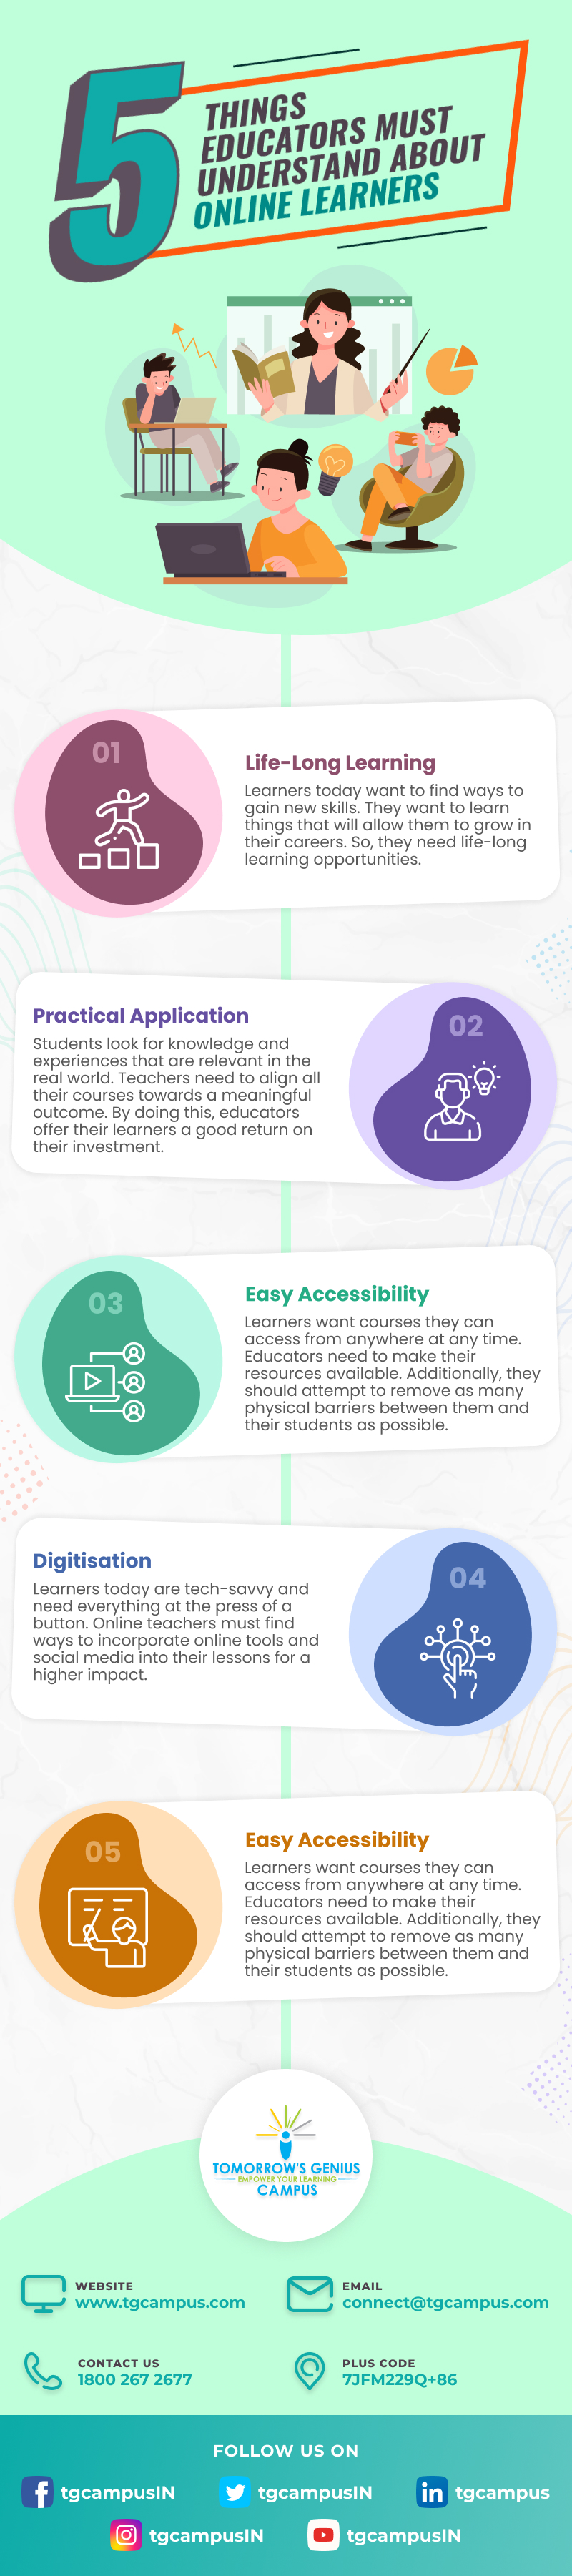 5 Things Educators Must Understand About Online Learners Infographic